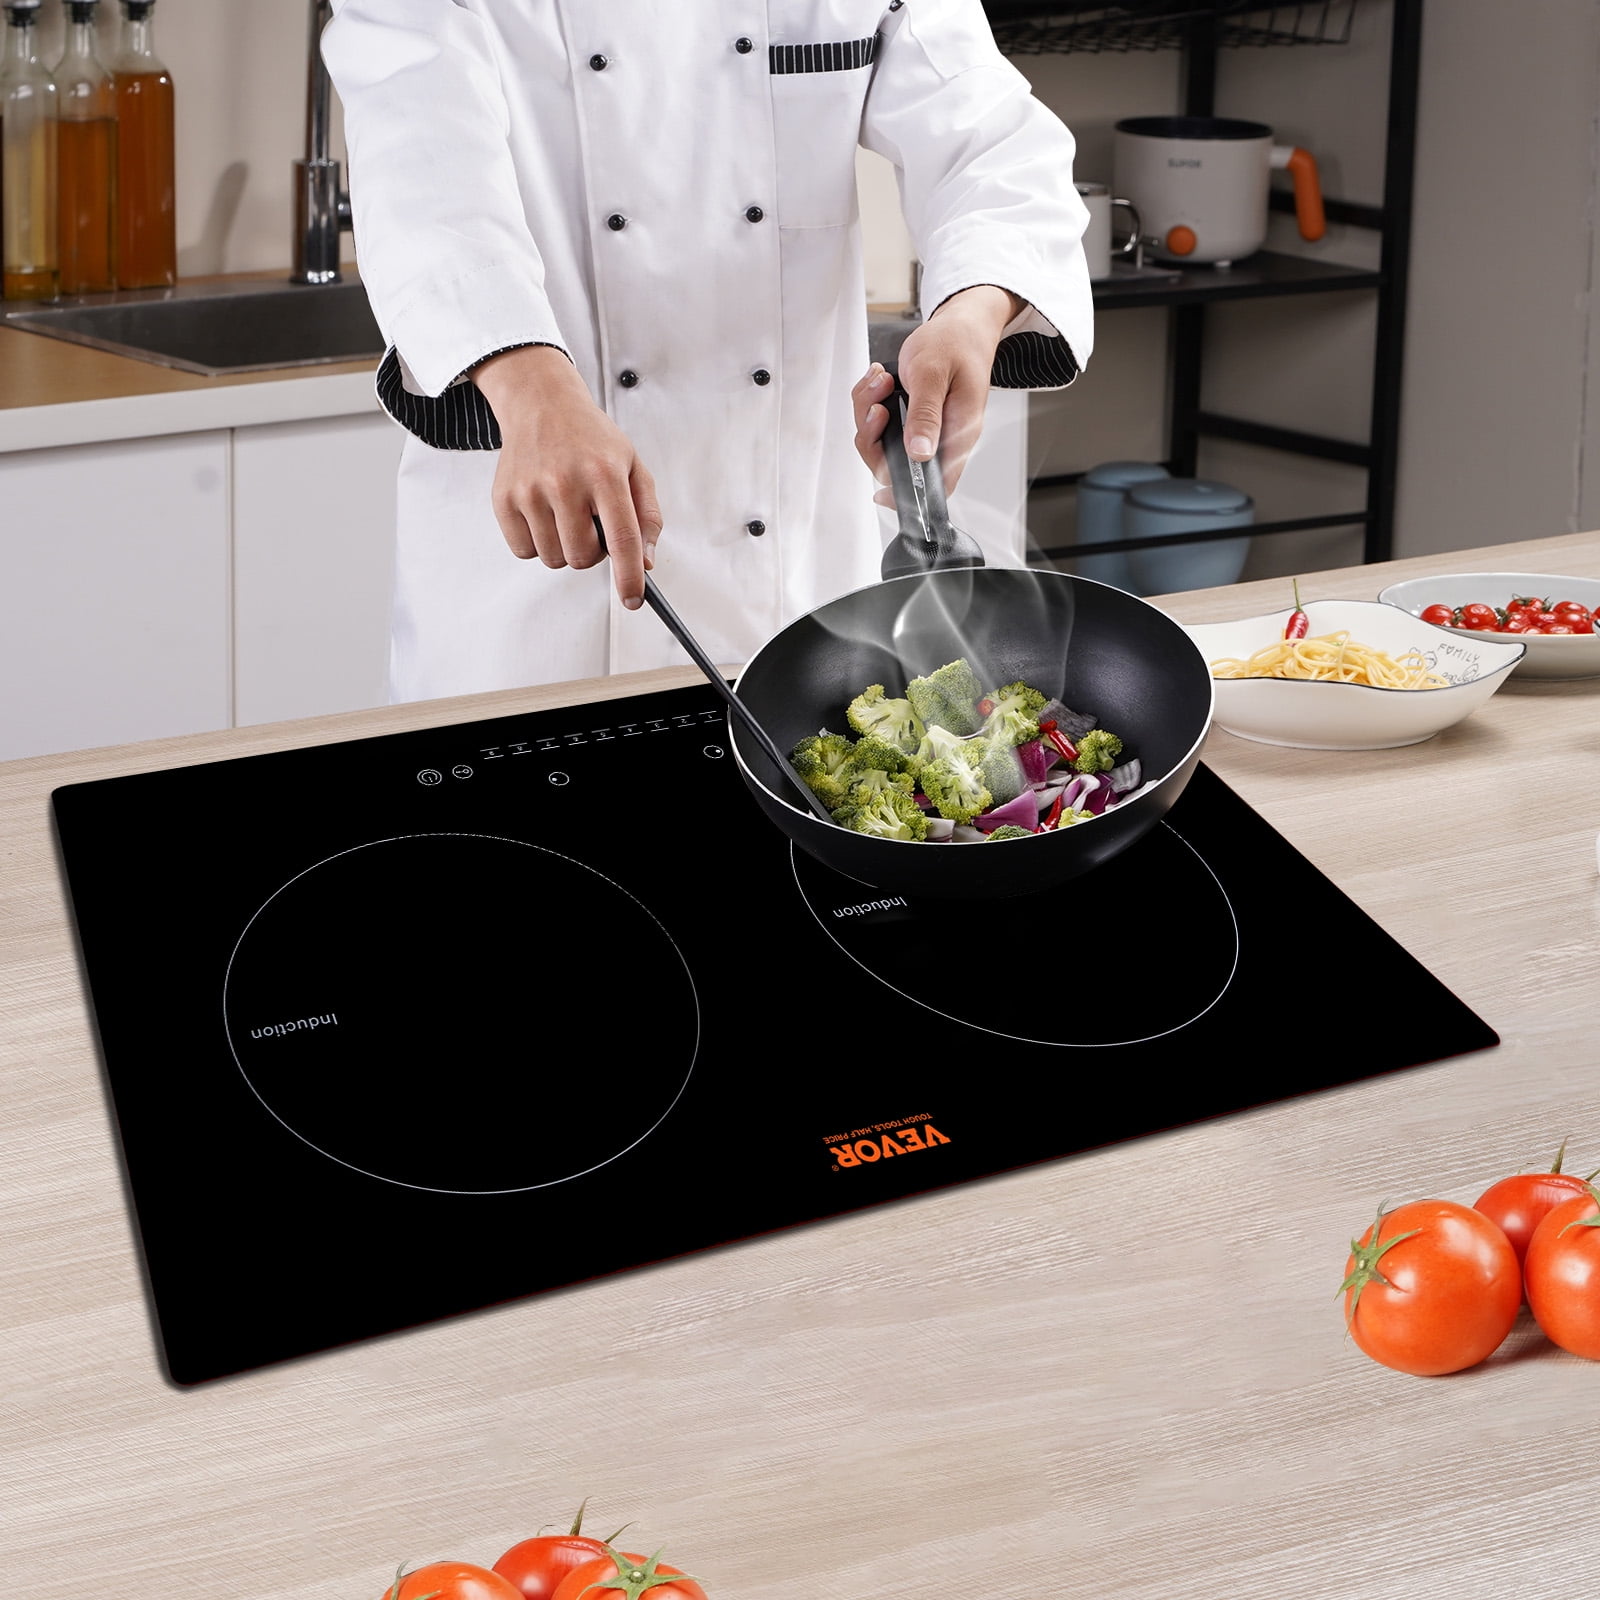 GIHETKUT Electric Cooktop, Built-in 4 Burners Electric Stove Top by Knob,  Hot Plate Electric Control with 9 Power Levels, Child Safety Lock & 99mins